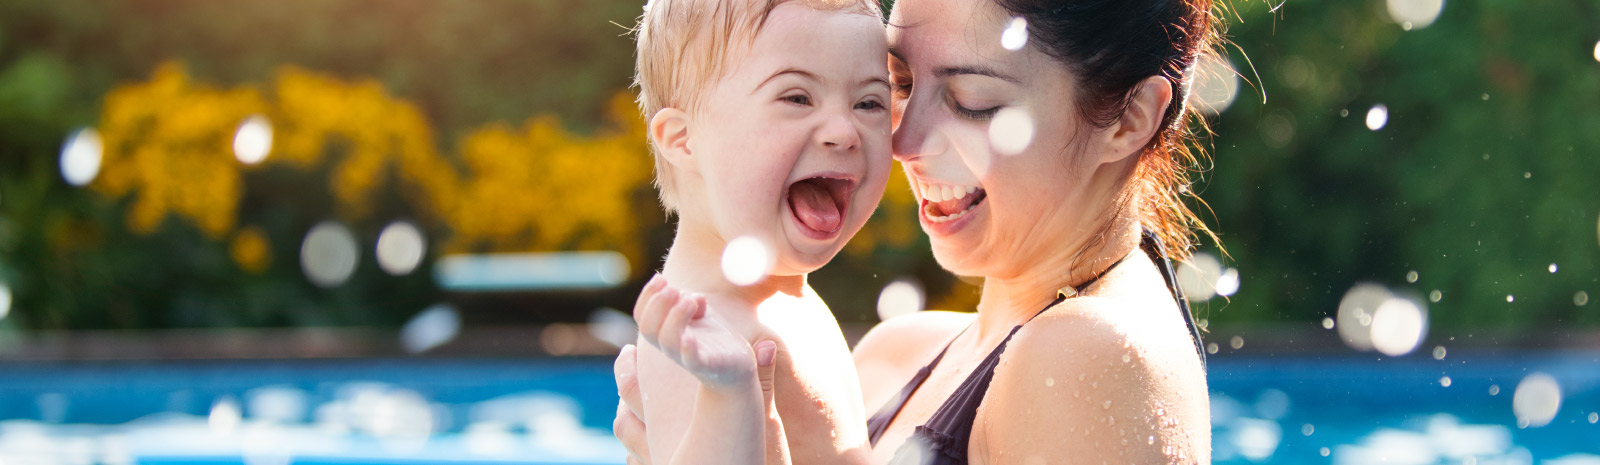 A mother enjoys holding her excited son while swimming.